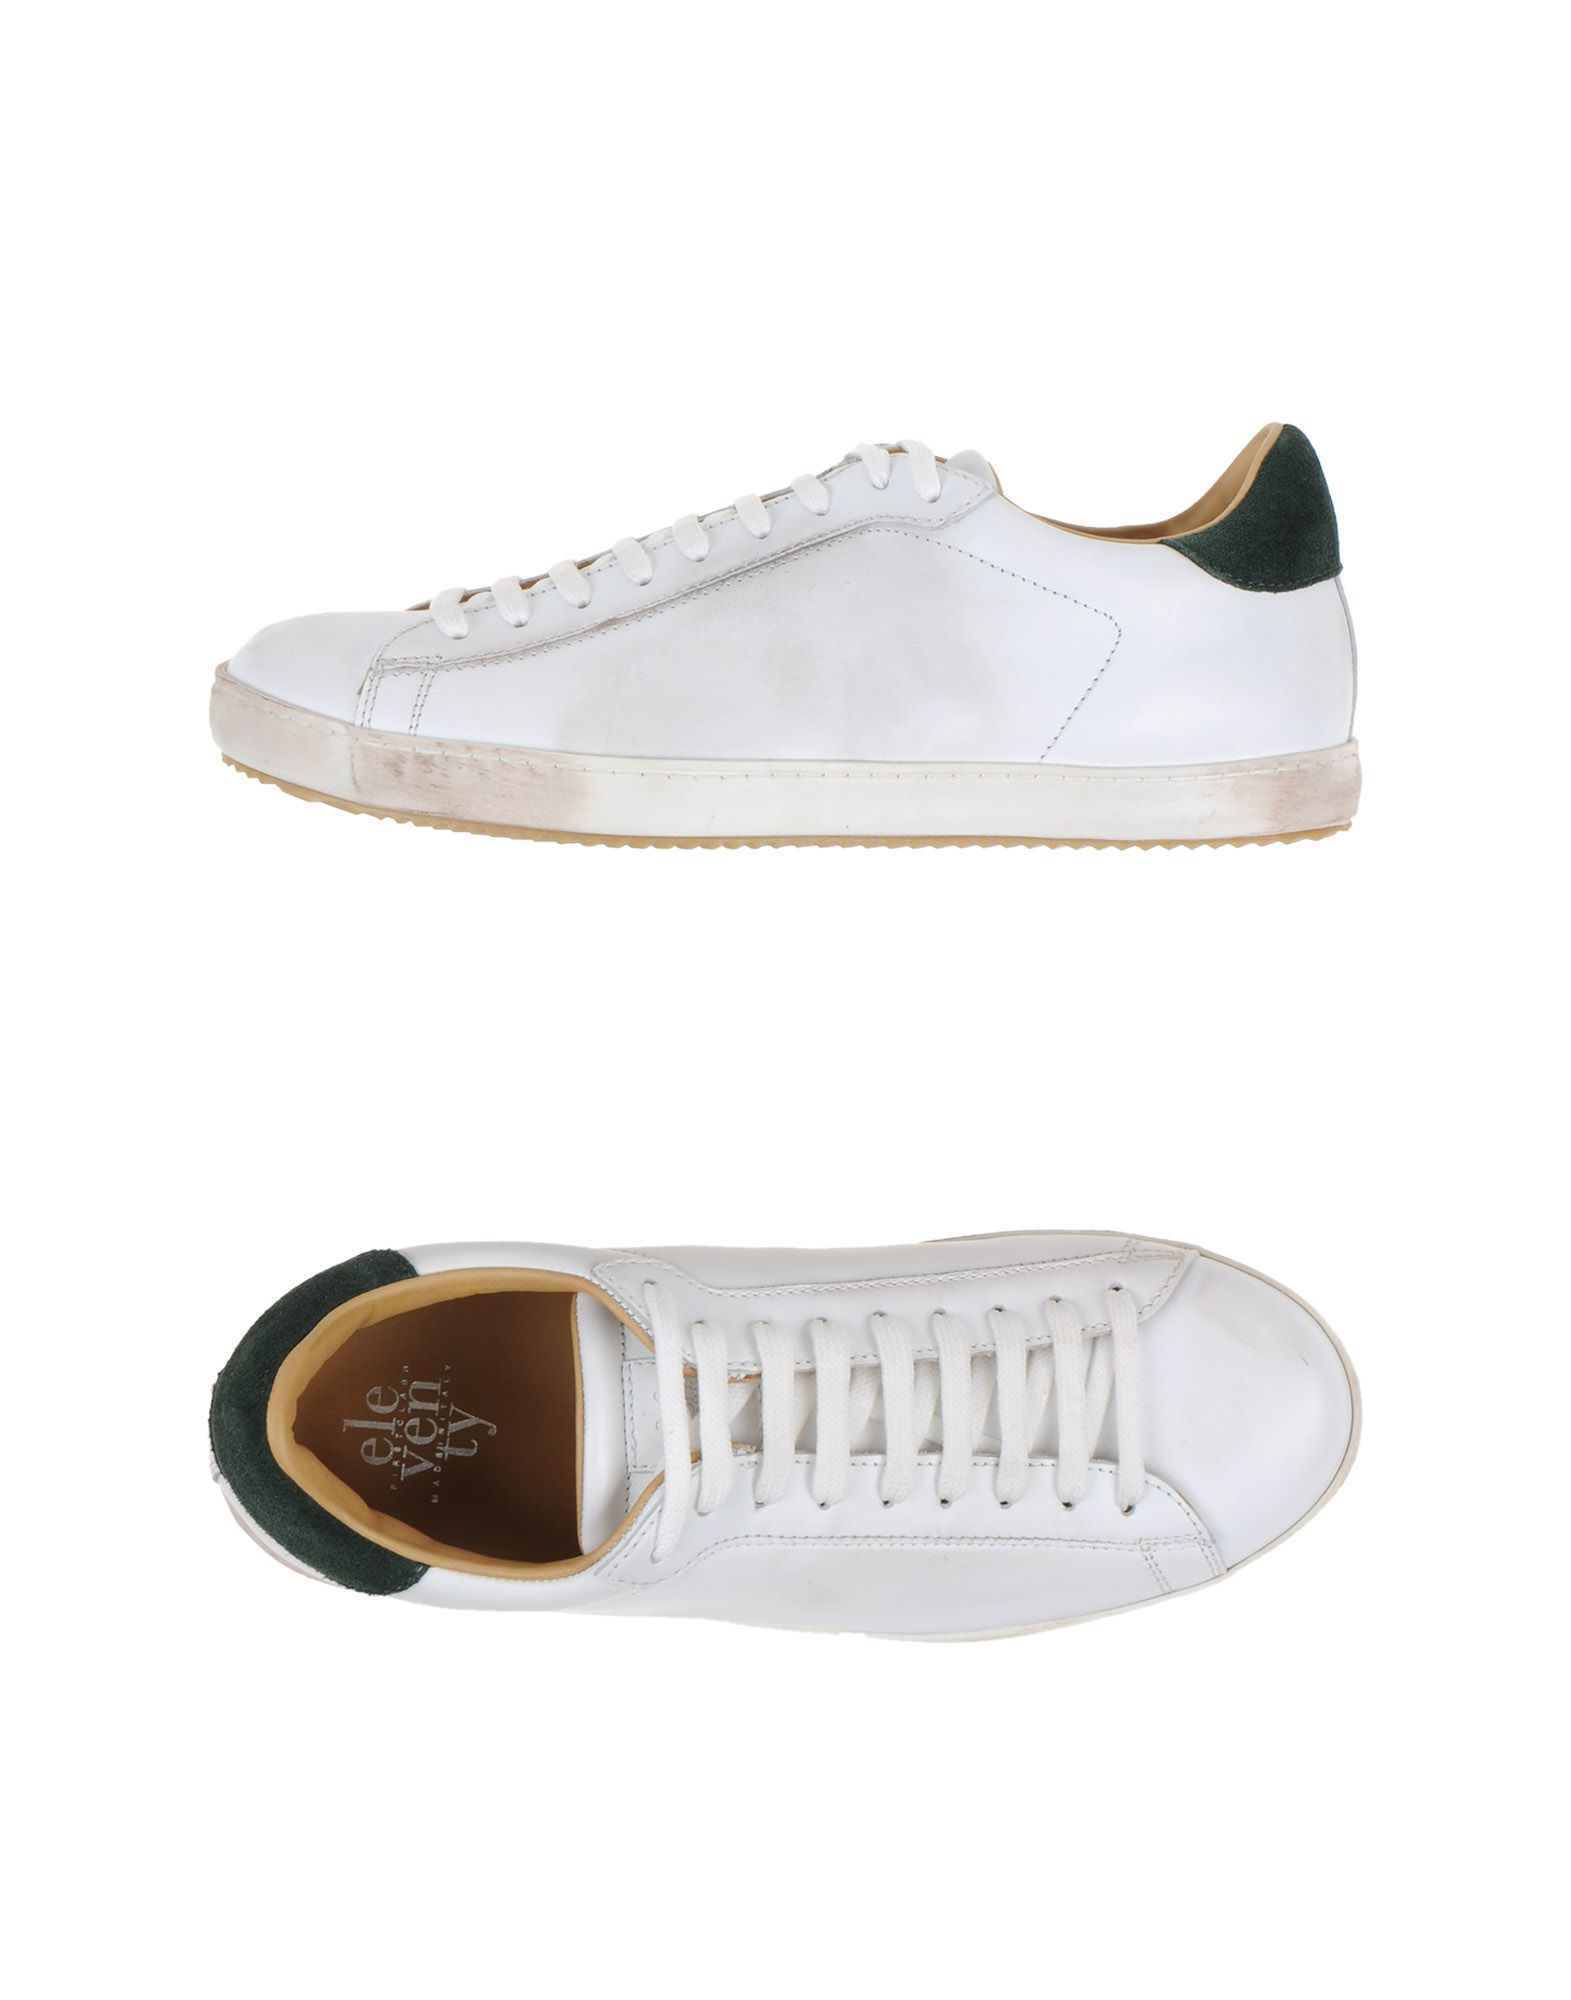 Lyst - Eleventy Low-tops & Trainers in White for Men